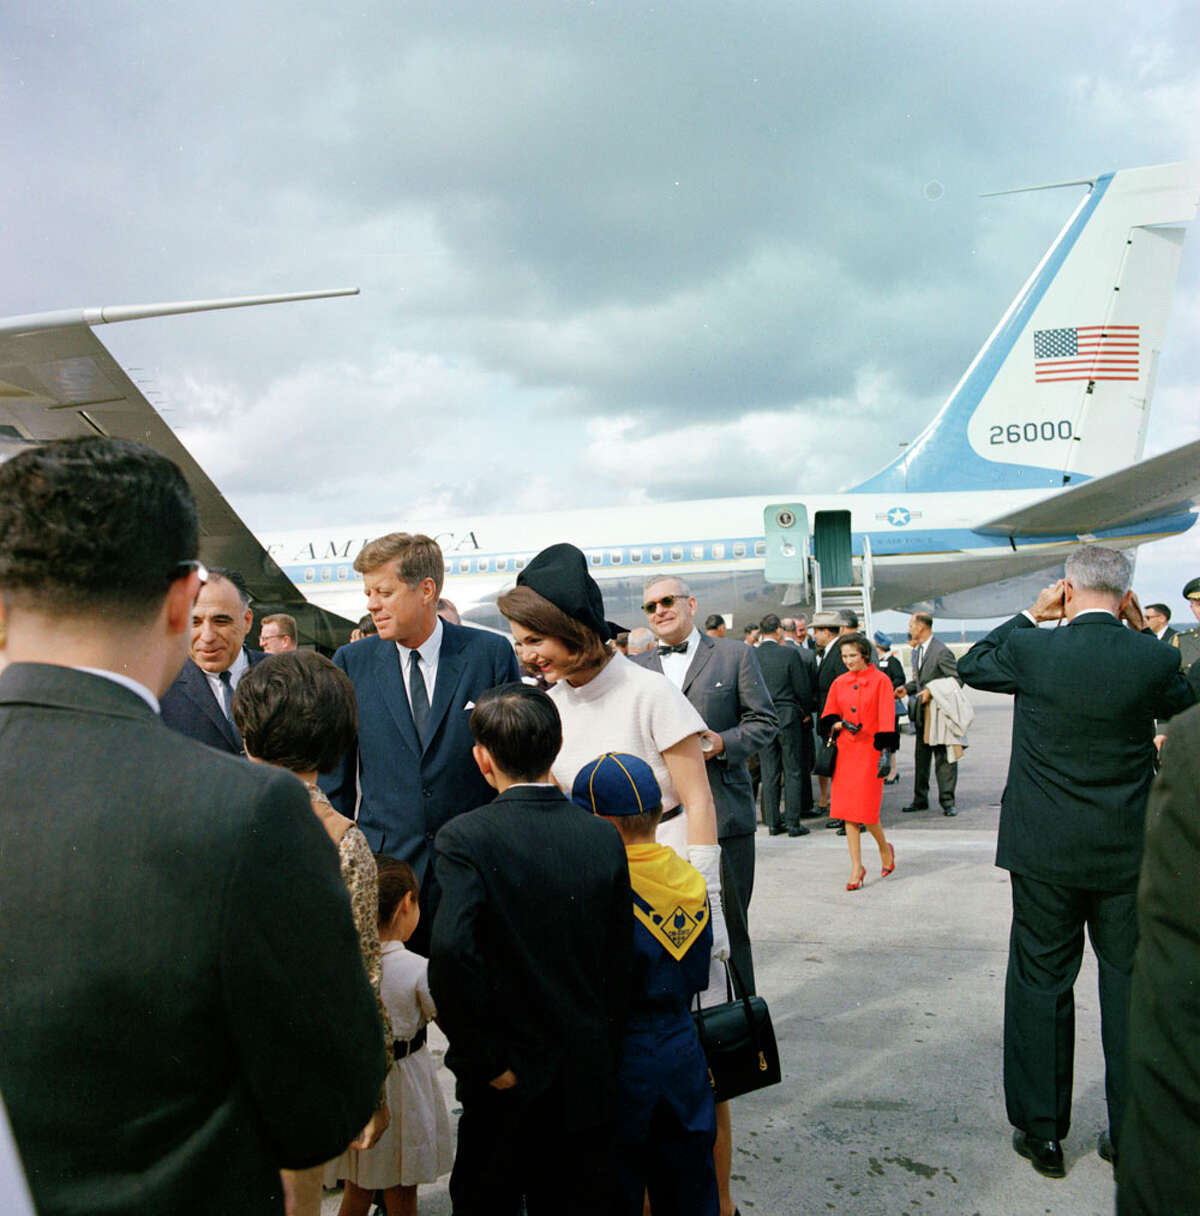 U.S. Congressman Henry B. Gonzalez, four of his children and wife Bertha (walking up behind them) were on hand when the Kennedys arrived Nov. 21, 1963 at San Antonio International Airport. All Photos Courtesy of Creative Differences production company. ST-C420-30-63 21 November 1963 Trip to Texas: San Antonio: Arrival at San Antonio International Airport Please credit "Cecil Stoughton. White House Photographs. John F. Kennedy Presidential Library and Museum, Boston"